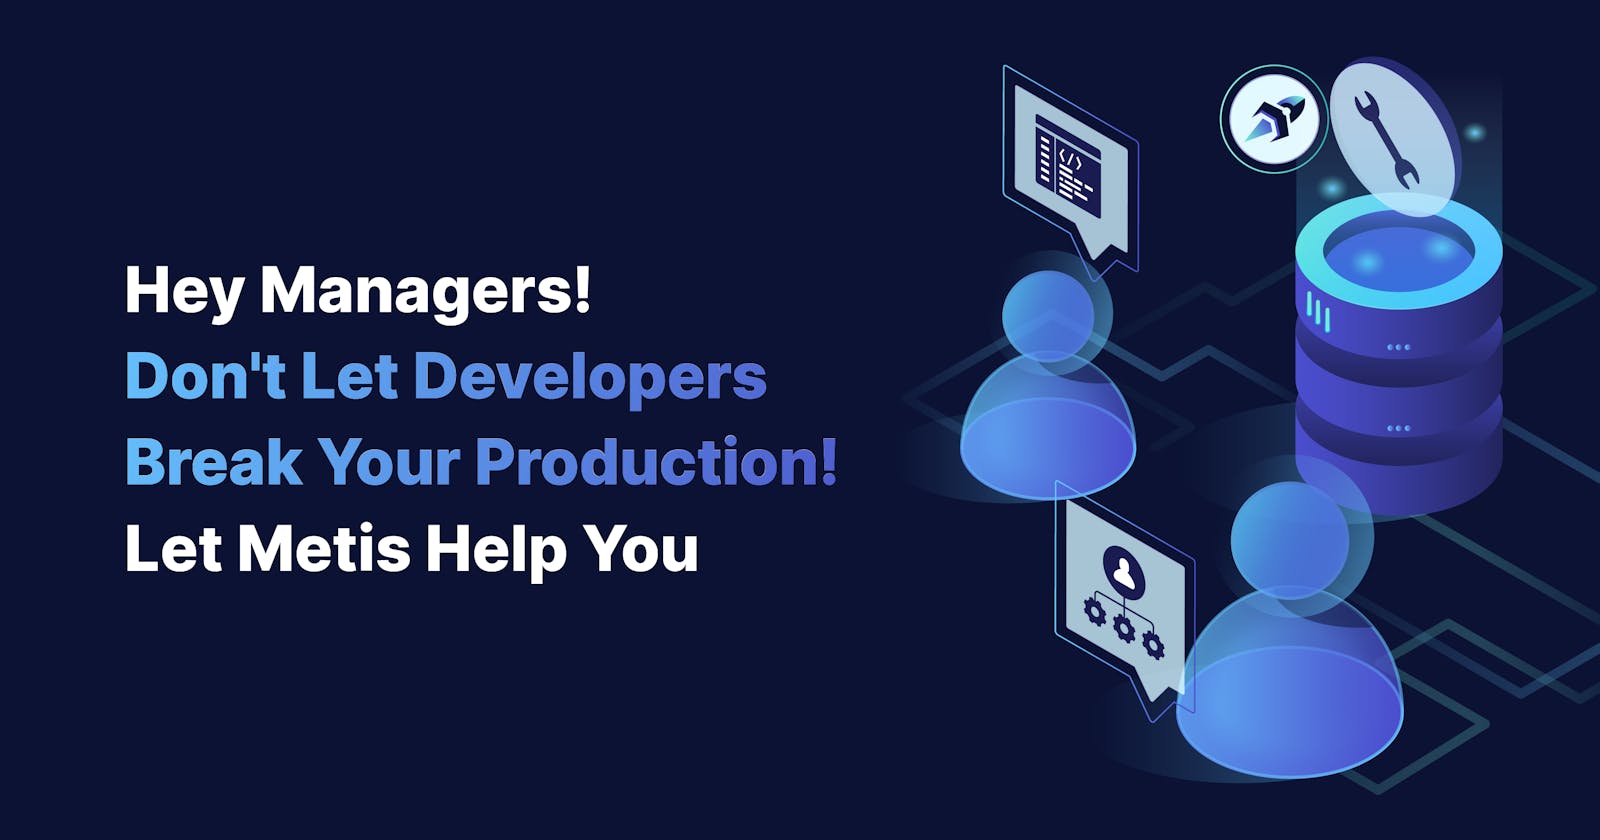 Hey Managers! Don't Let Developers Break Your Production! Let Metis Help You